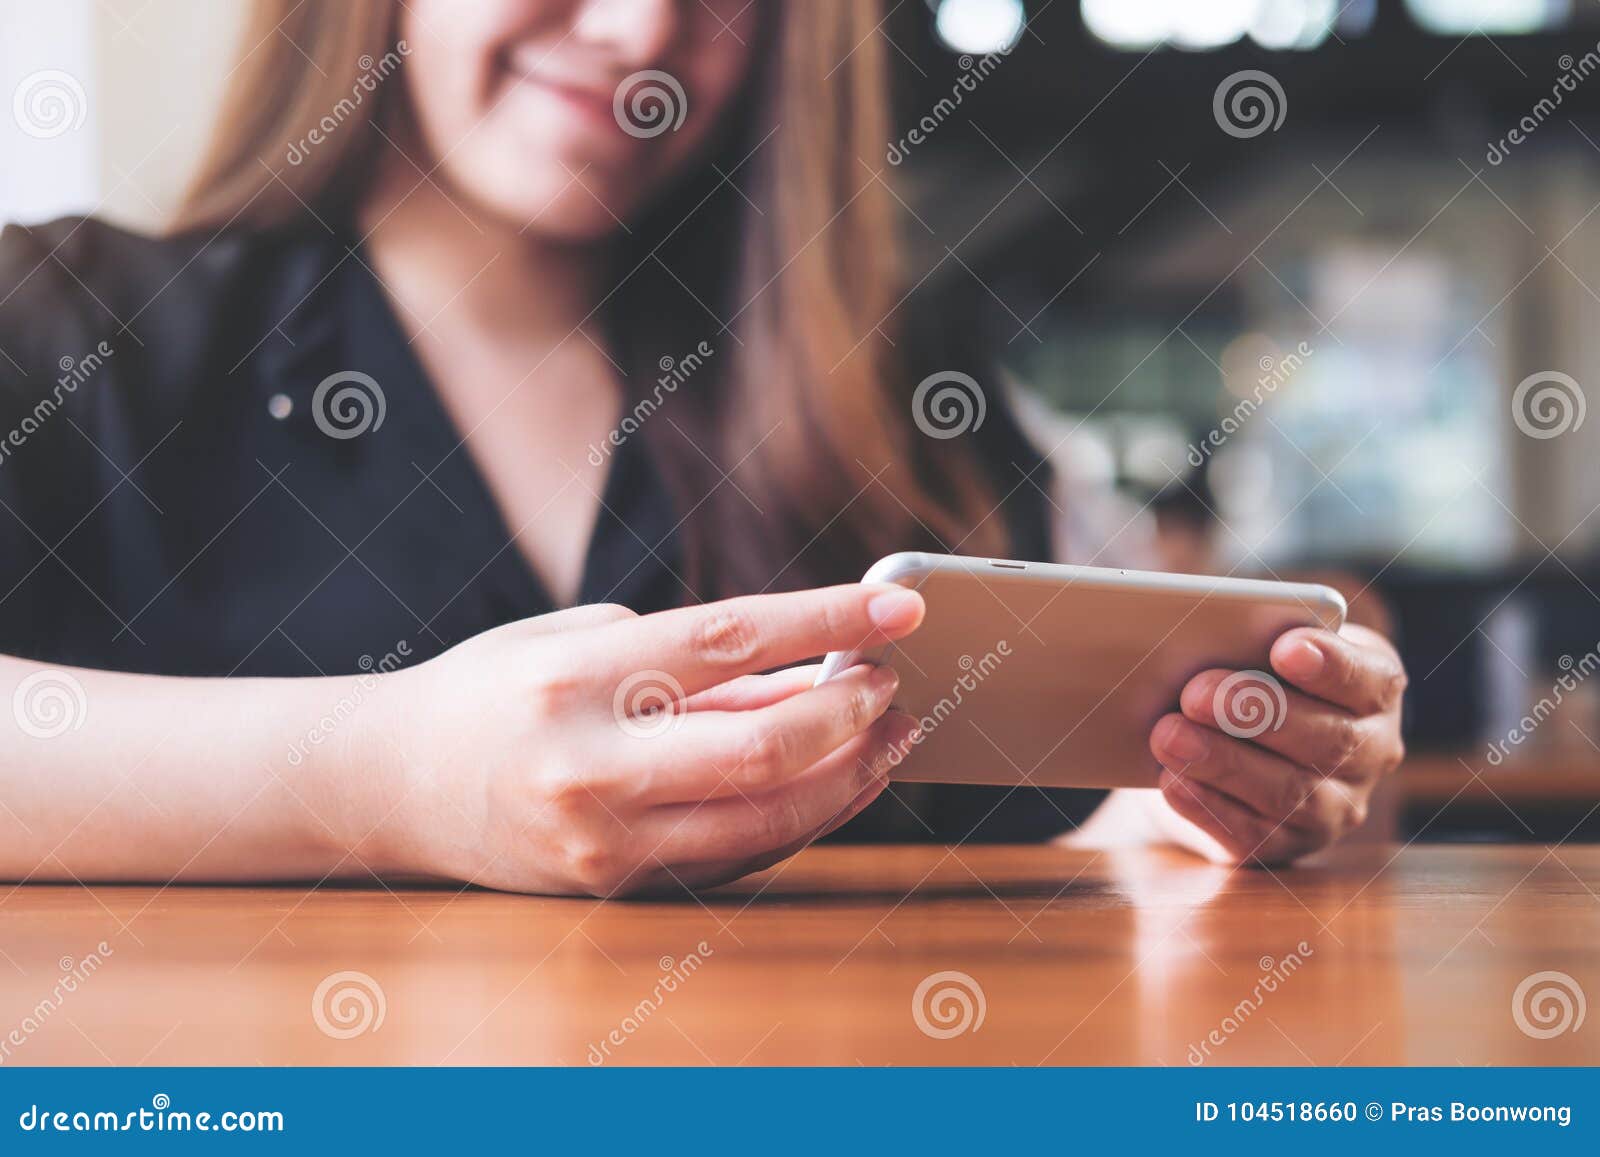 30,080 Women Playing Games Mobile Phones Images, Stock Photos & Vectors